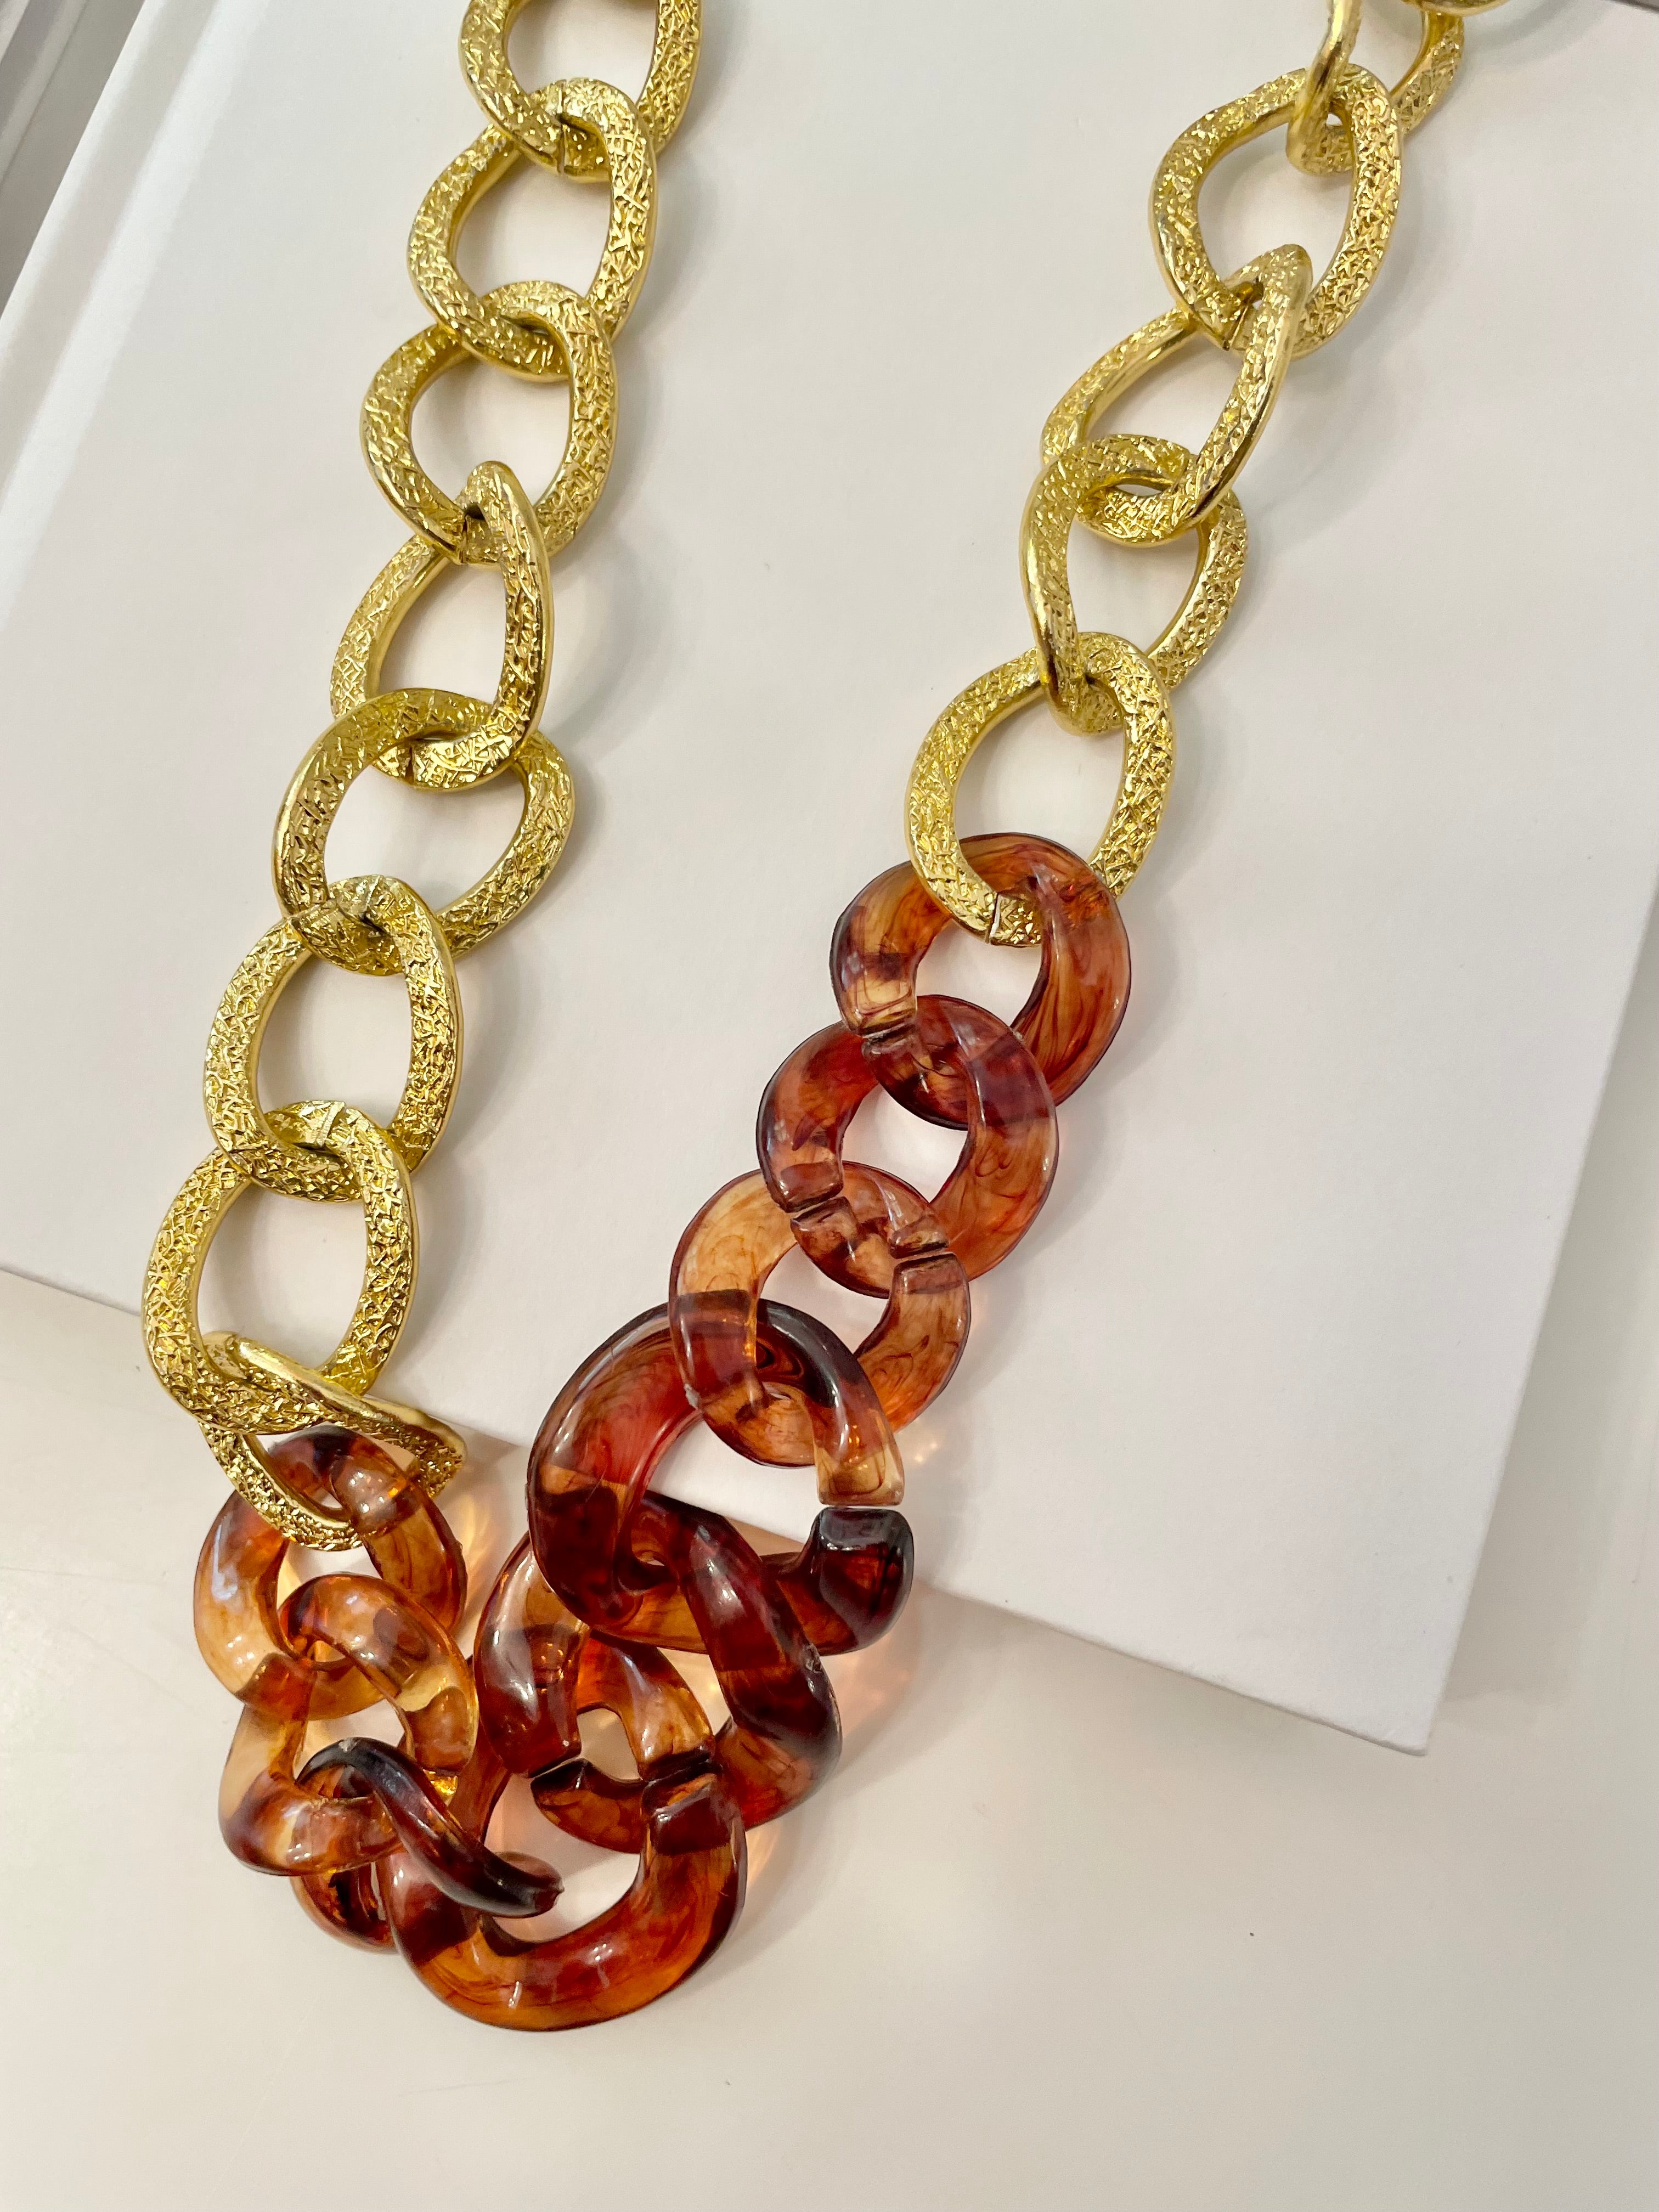 The Socialite and her love of gold chains.. this one is extra special with the tortoise acrylic chains.. So elegant.